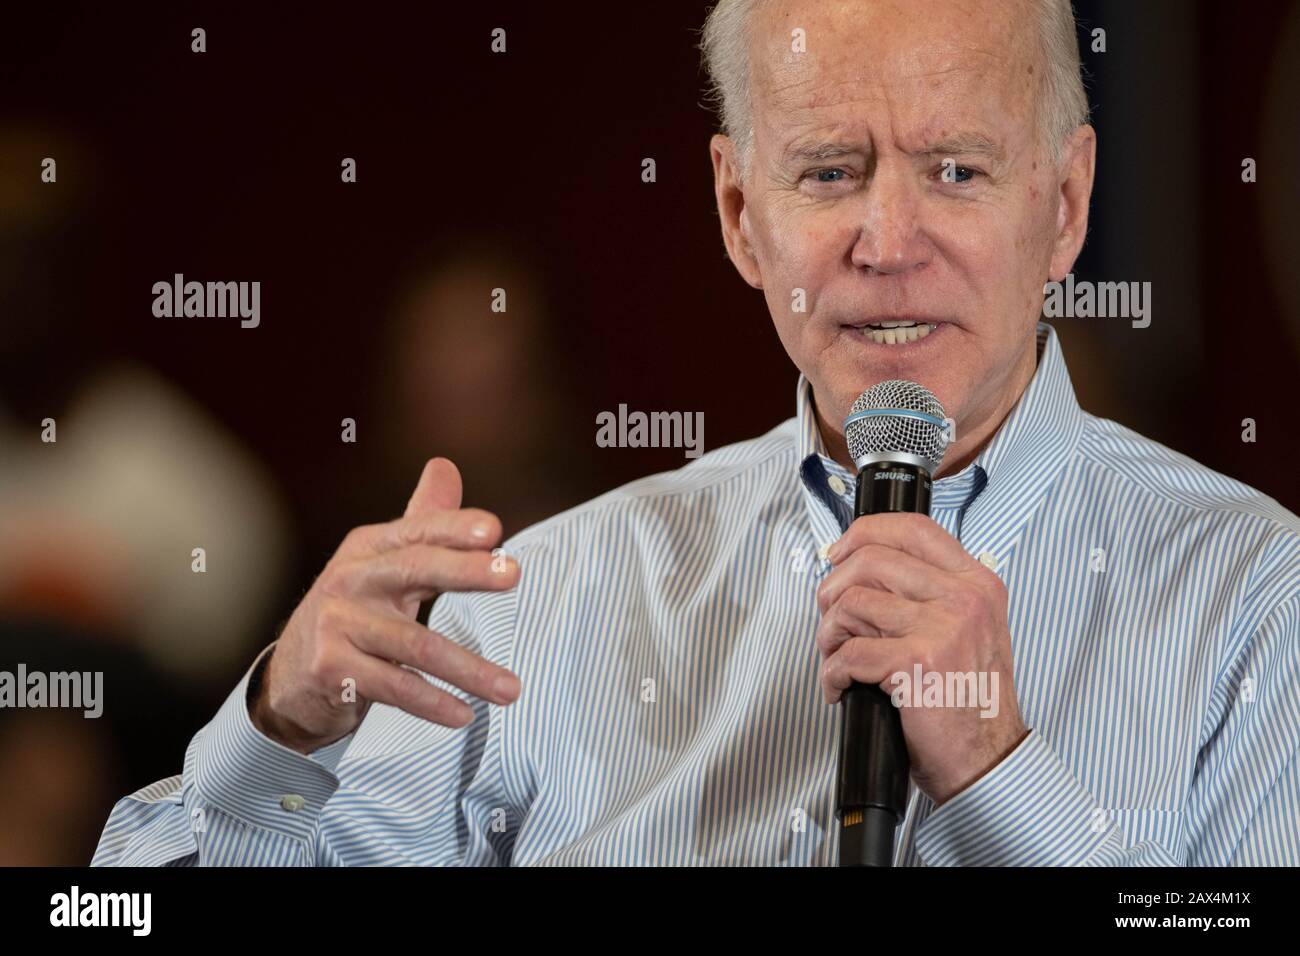 Former U.S. Vice President Joe Biden campaigns in Hampton, N.H., USA, on Feb. 9, 2020, during the New Hampshire presidential primary. Stock Photo